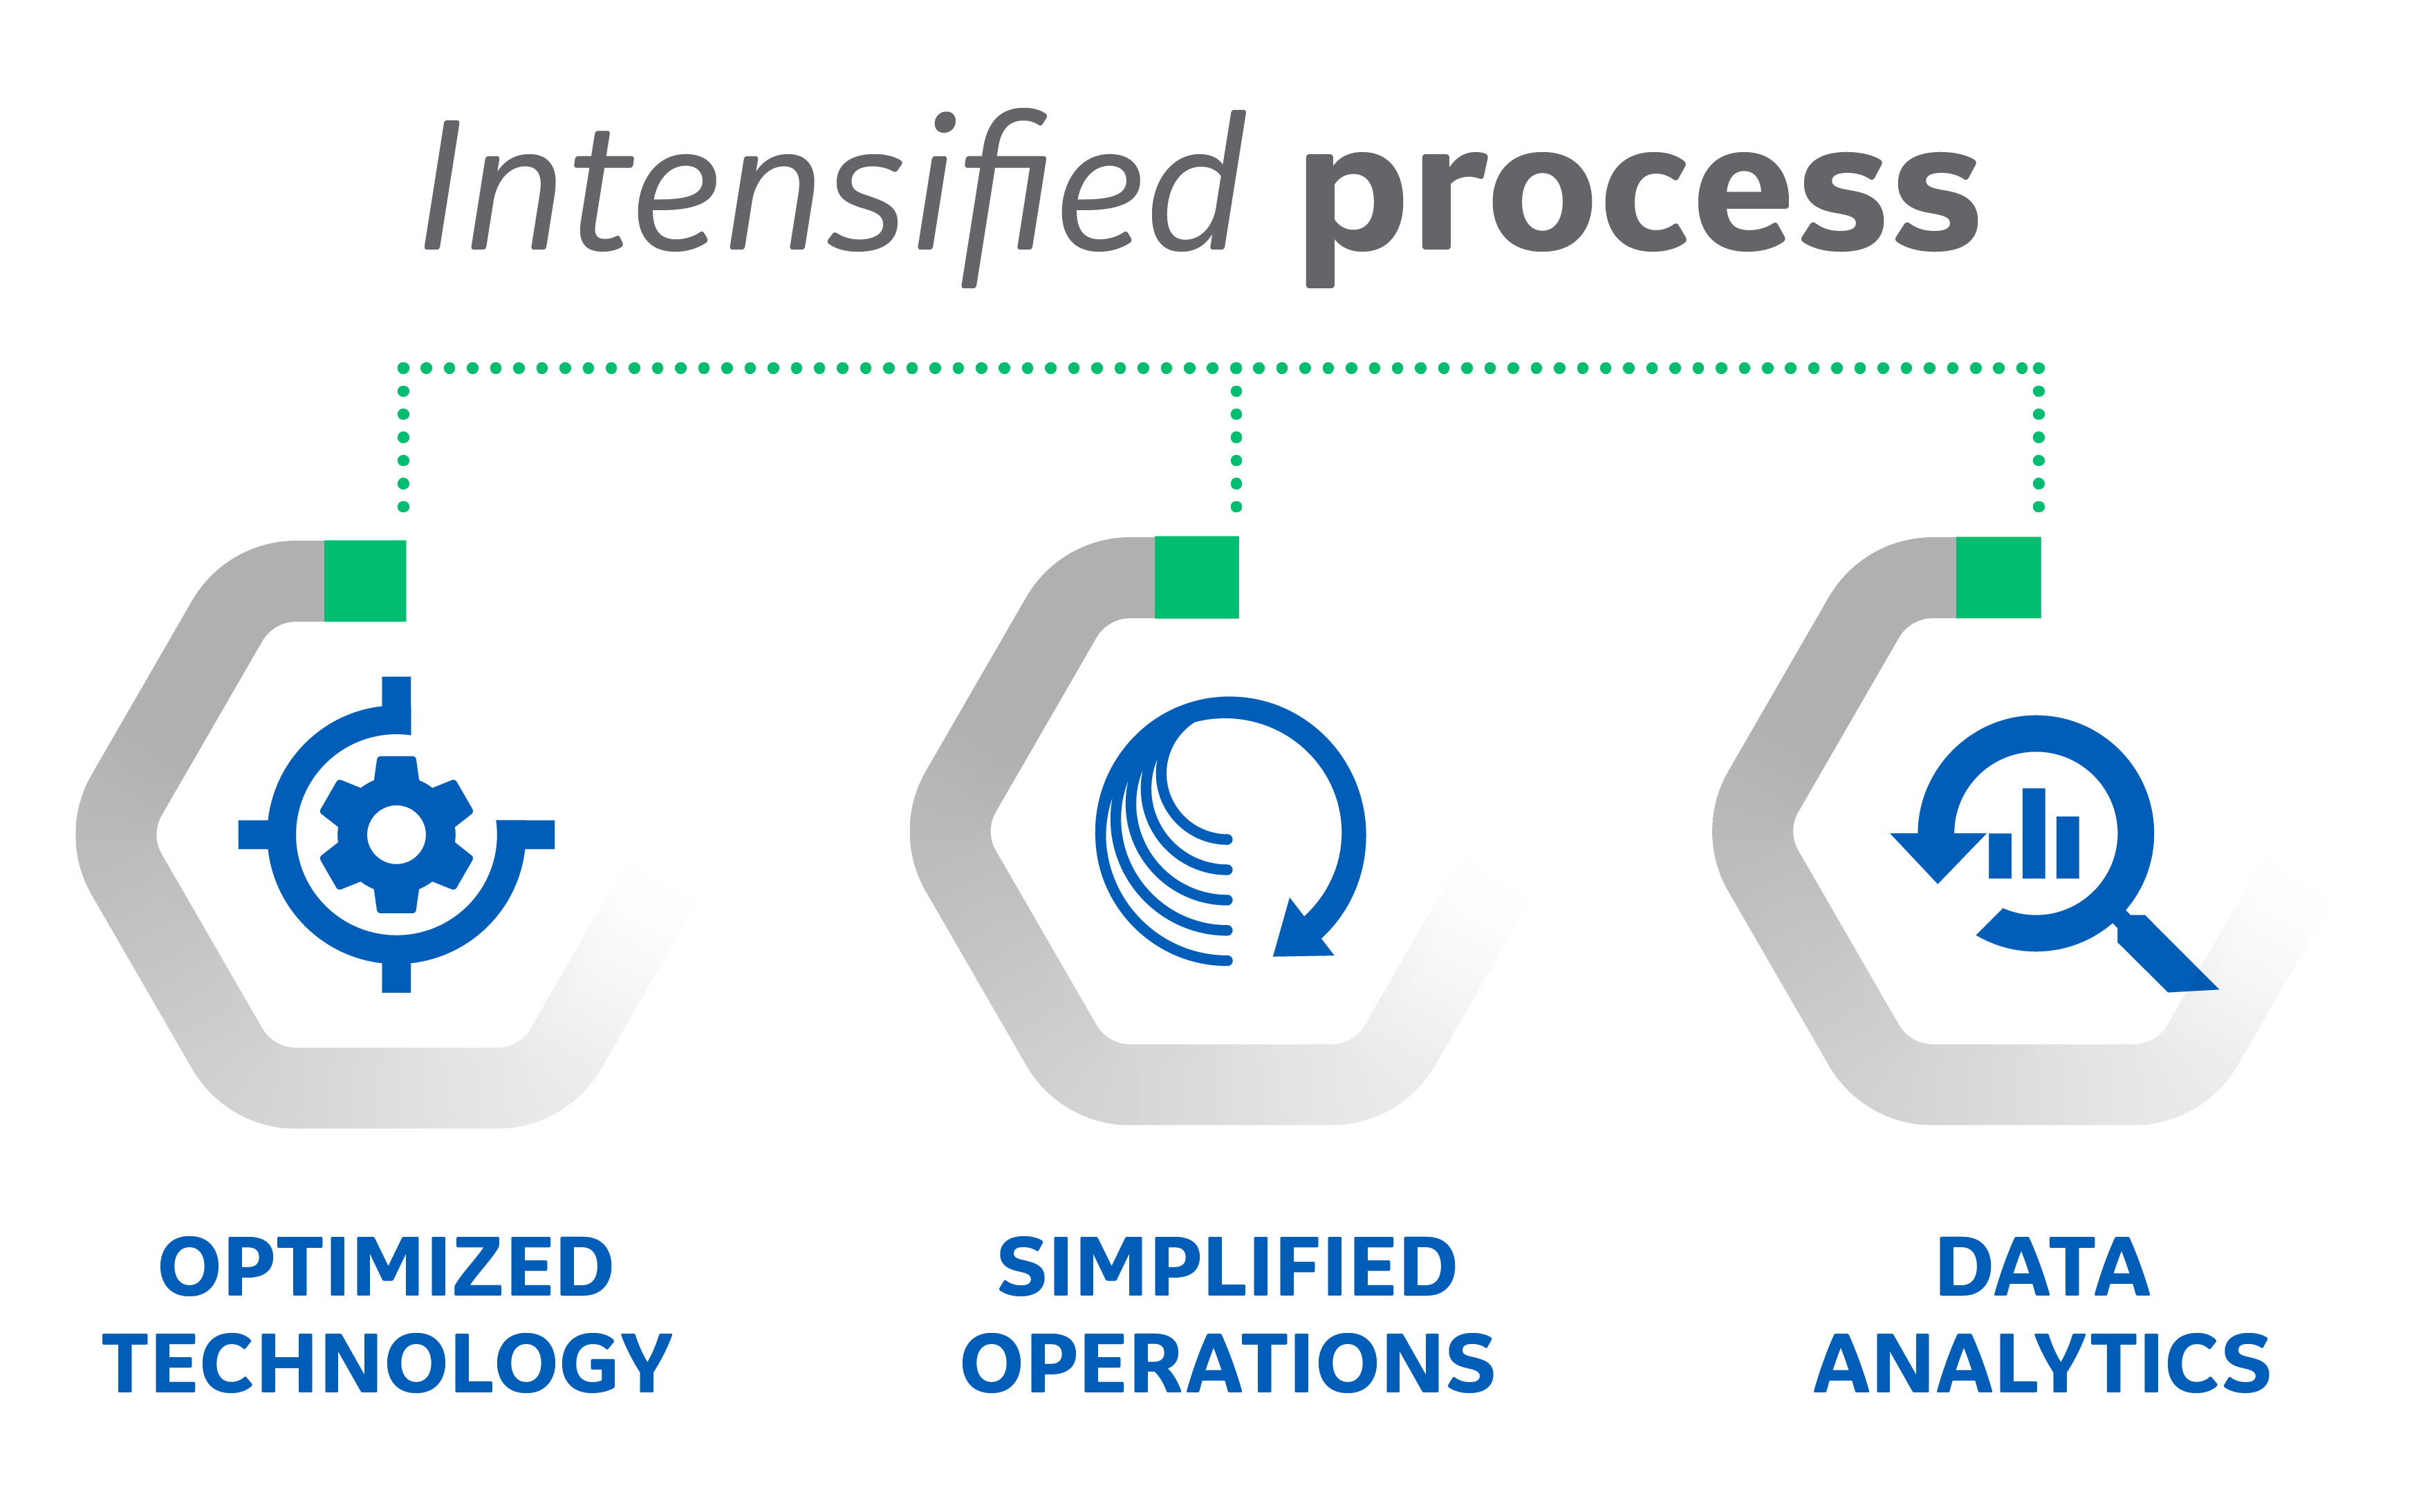 Process Intensification 3 pillars infographic for efficient biomanufacturing